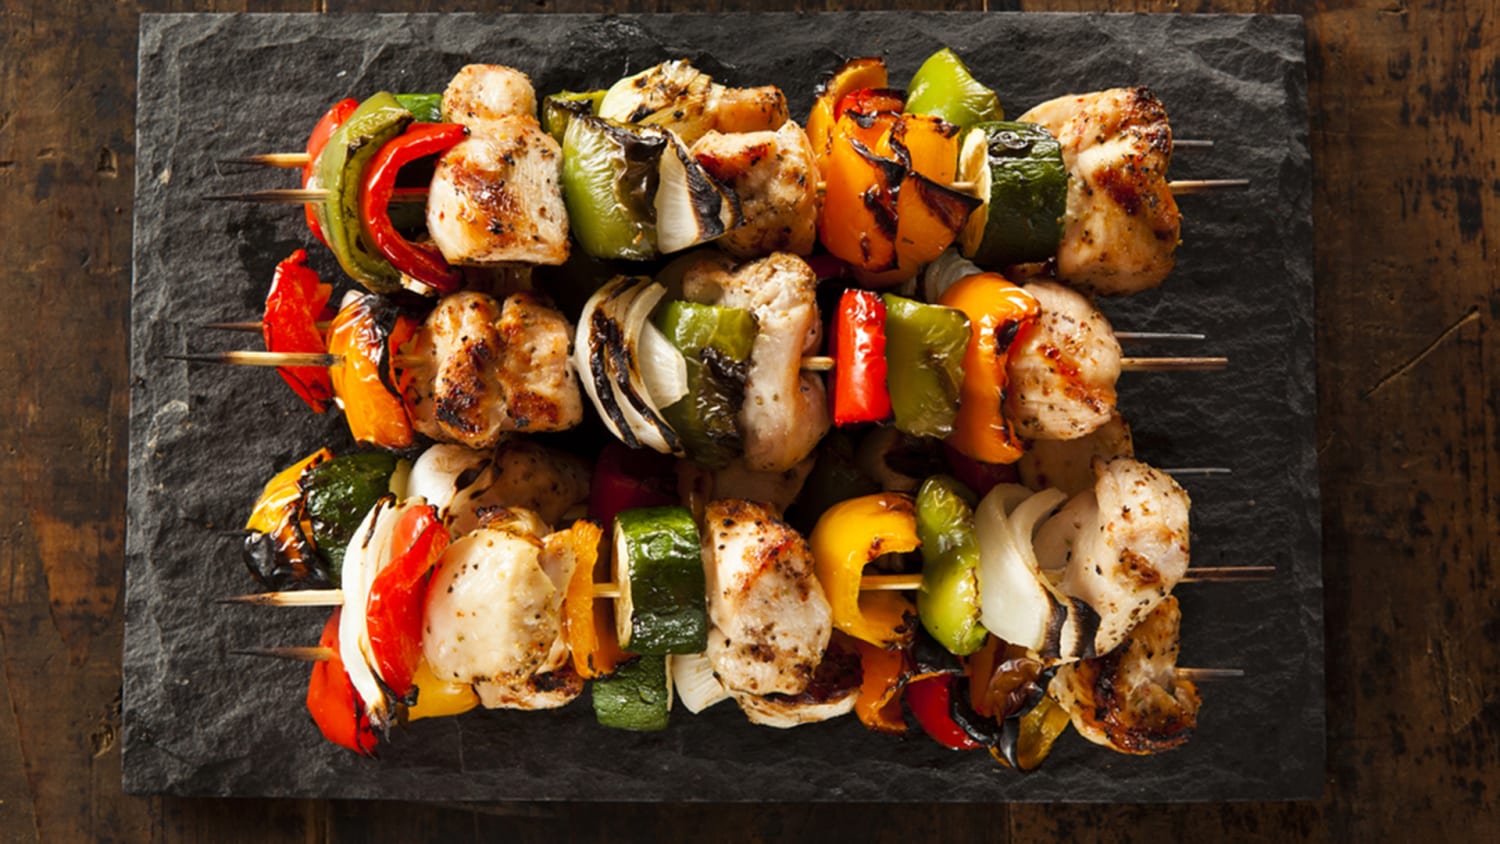 30 Healthy Grill Recipes for Summer 2017 - Low Calorie BBQ 